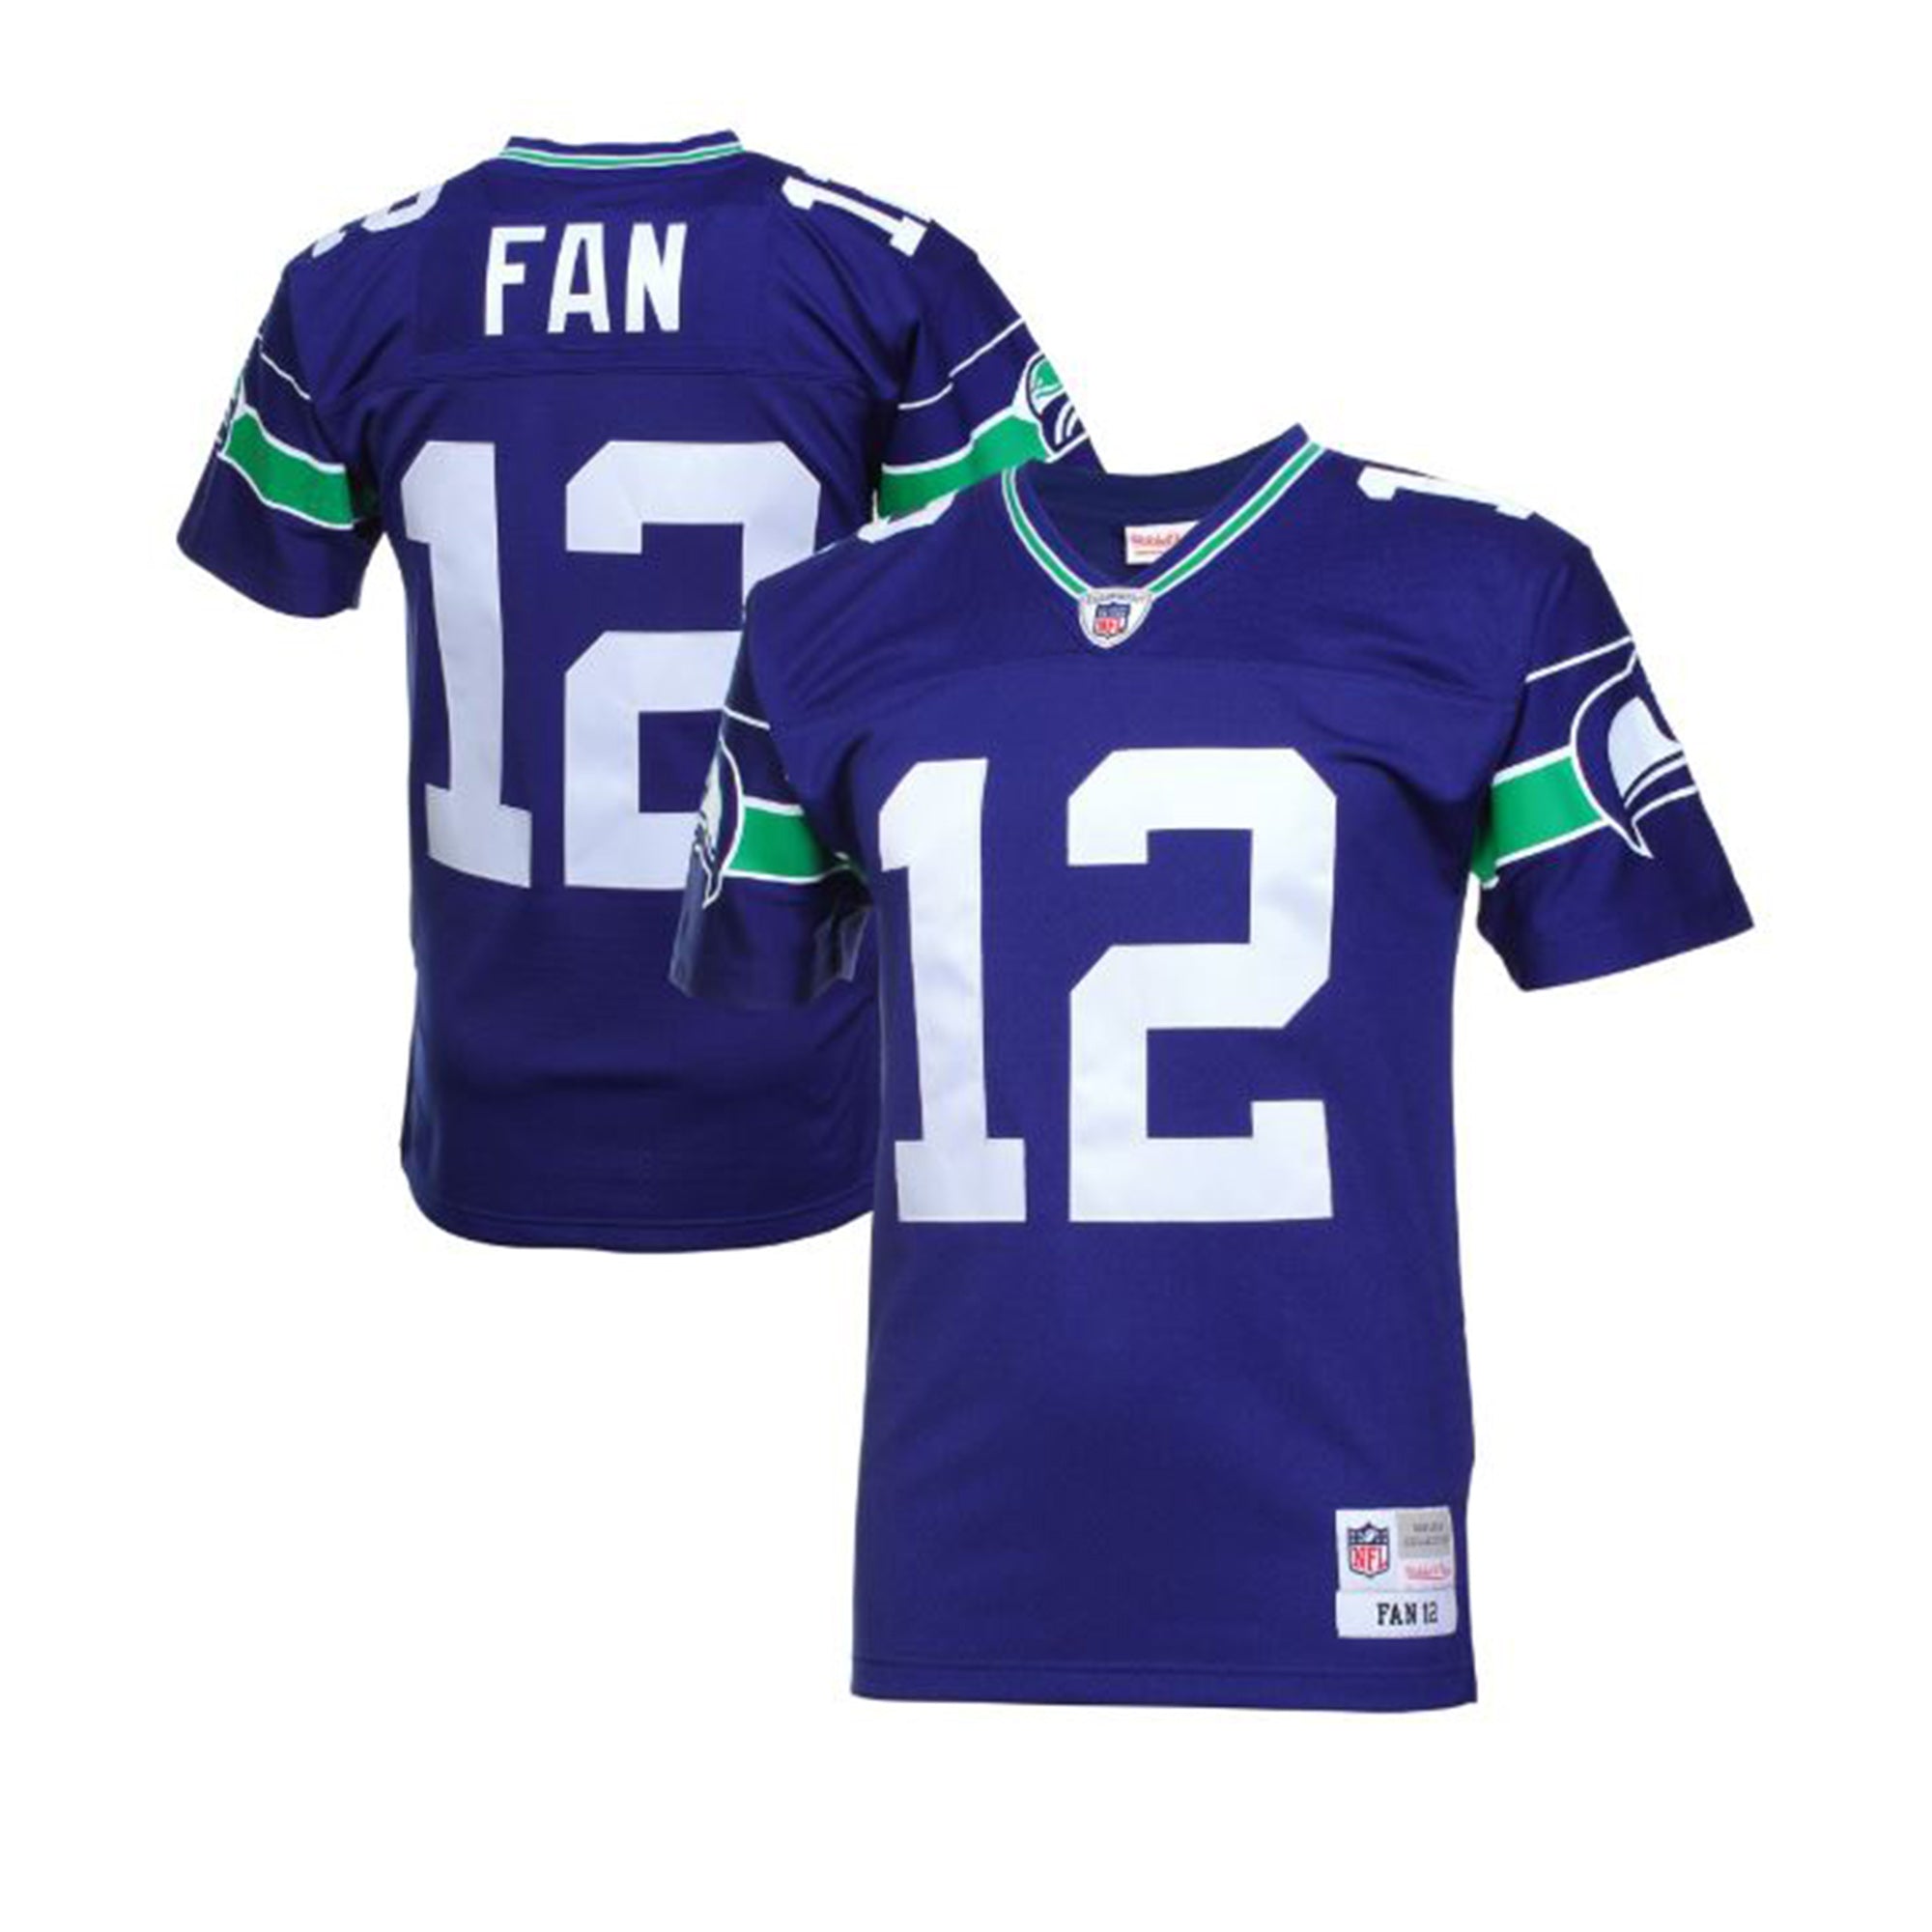 Jerseys - NFL, Authentic, Legacy Official Jerseys, & Sports Apparel